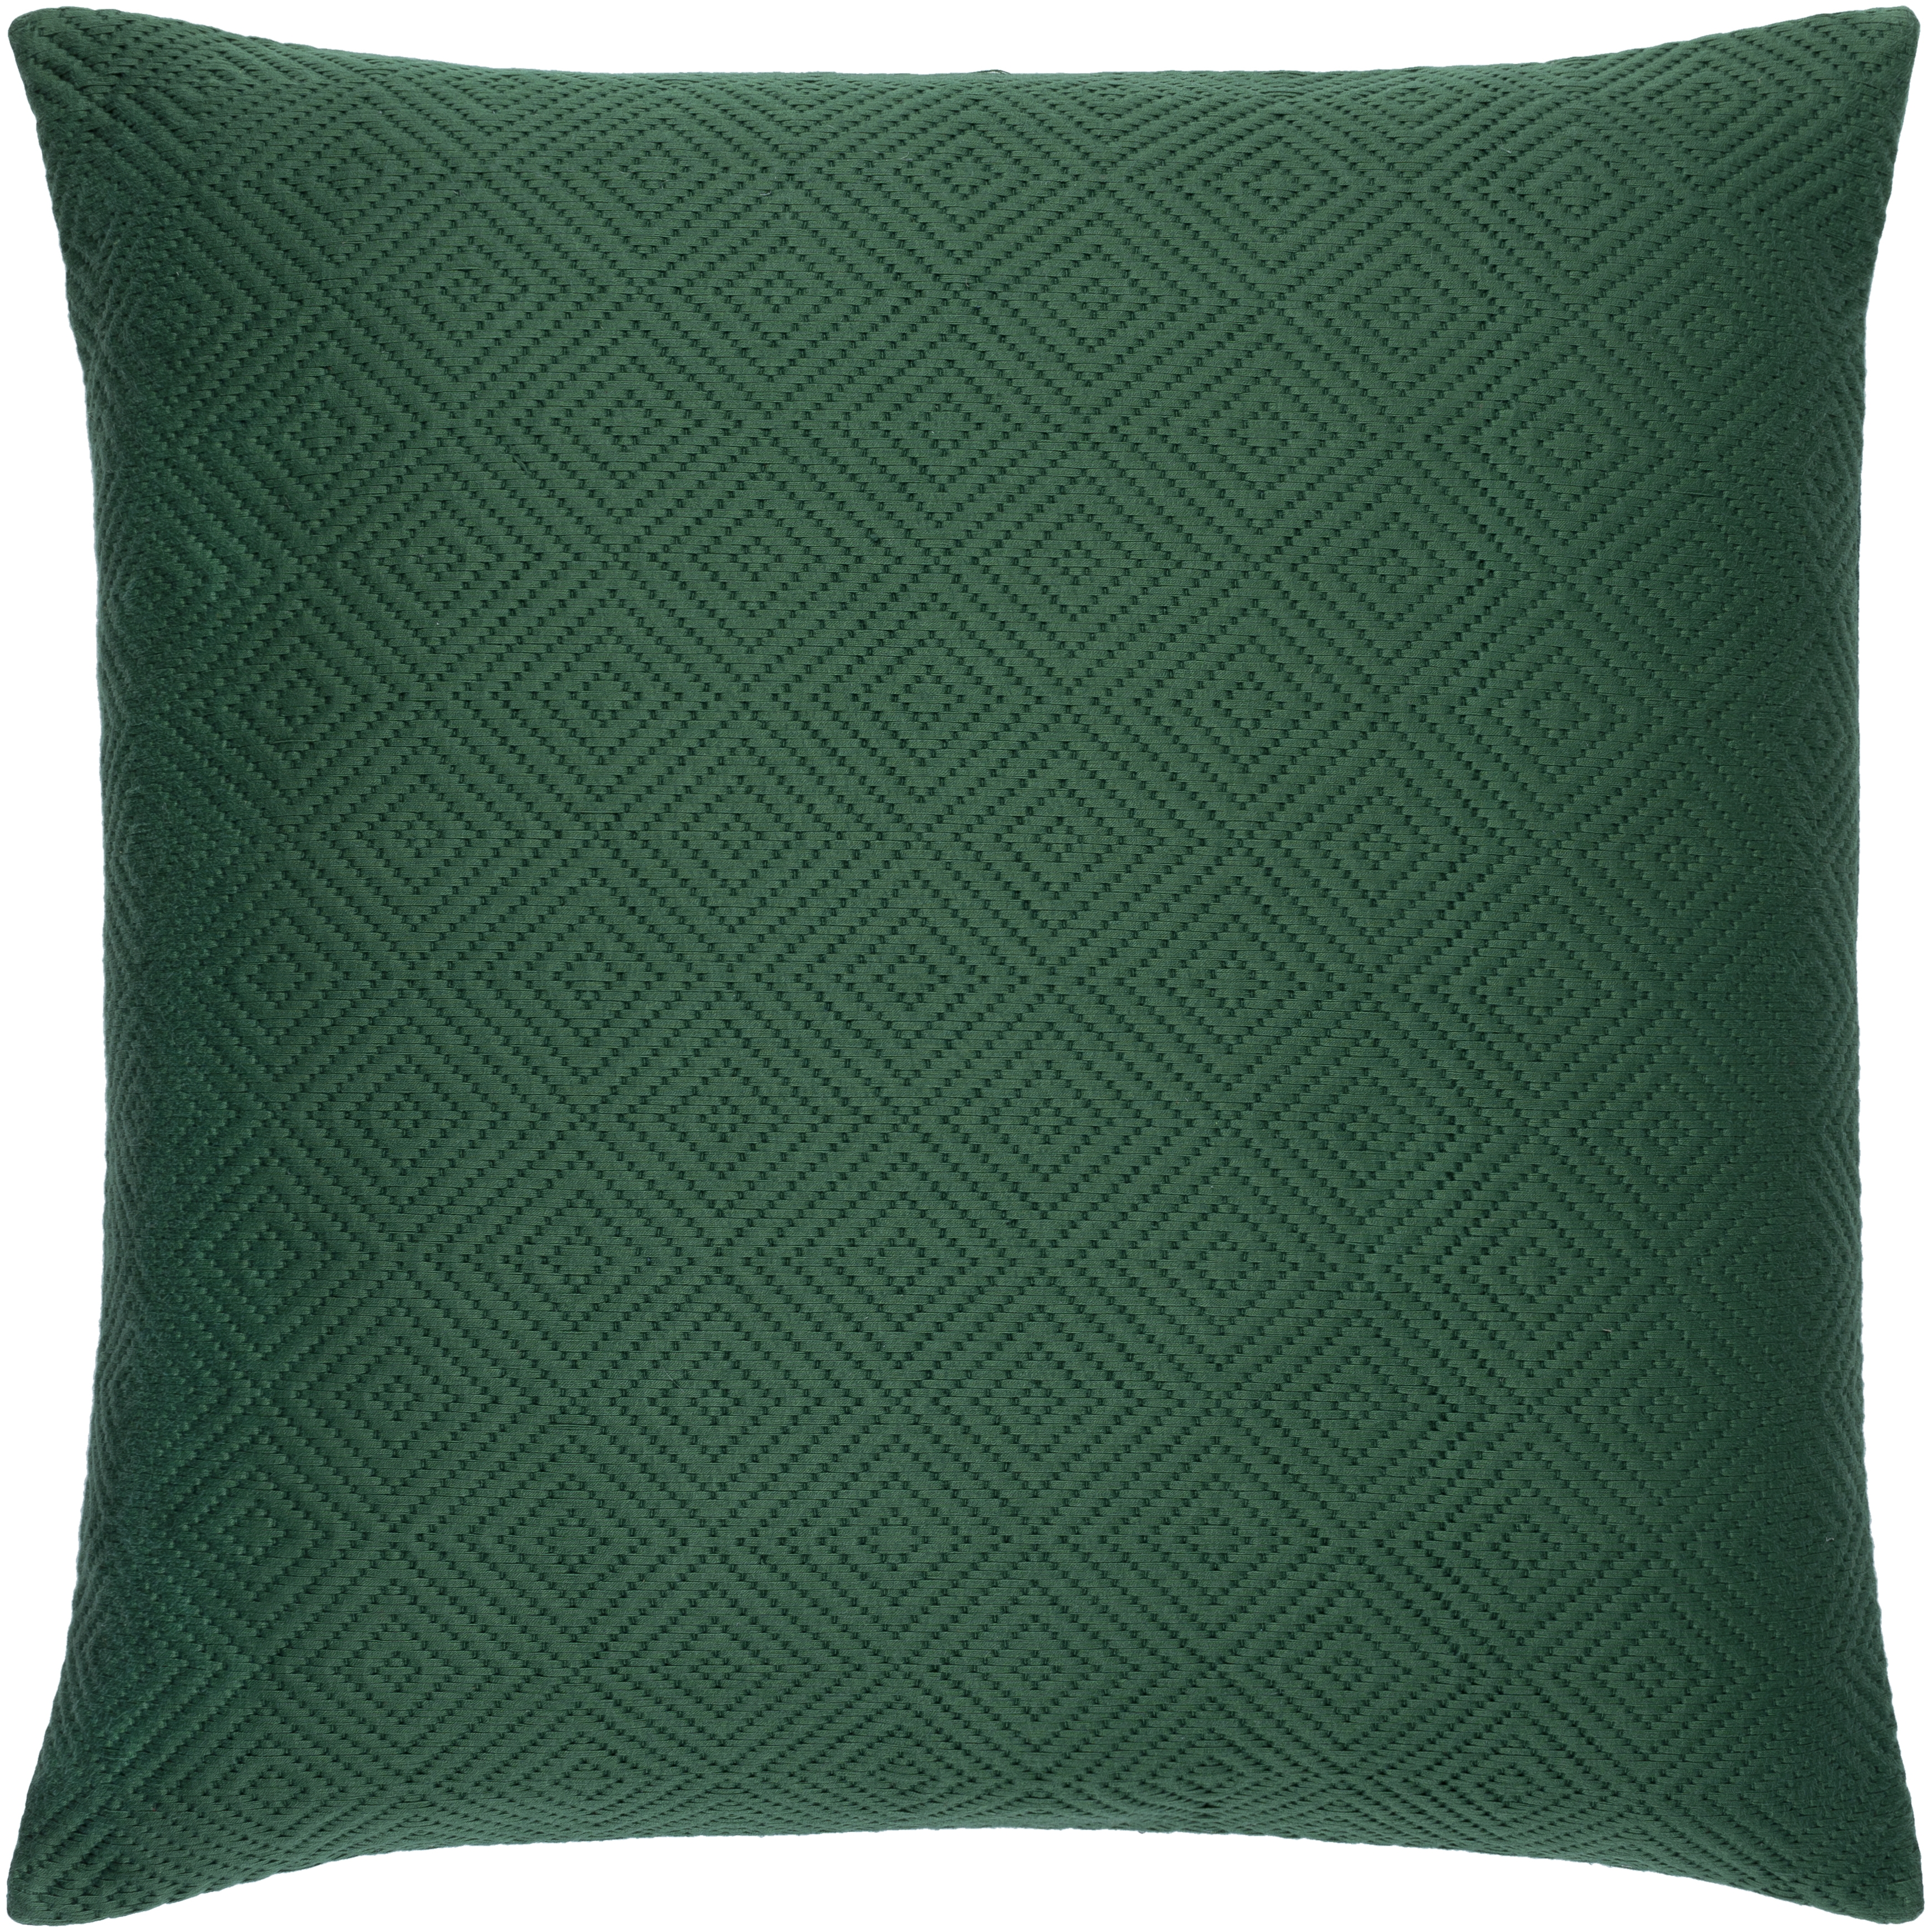 Camilla Throw Pillow, 22" x 22", with down insert - Image 0